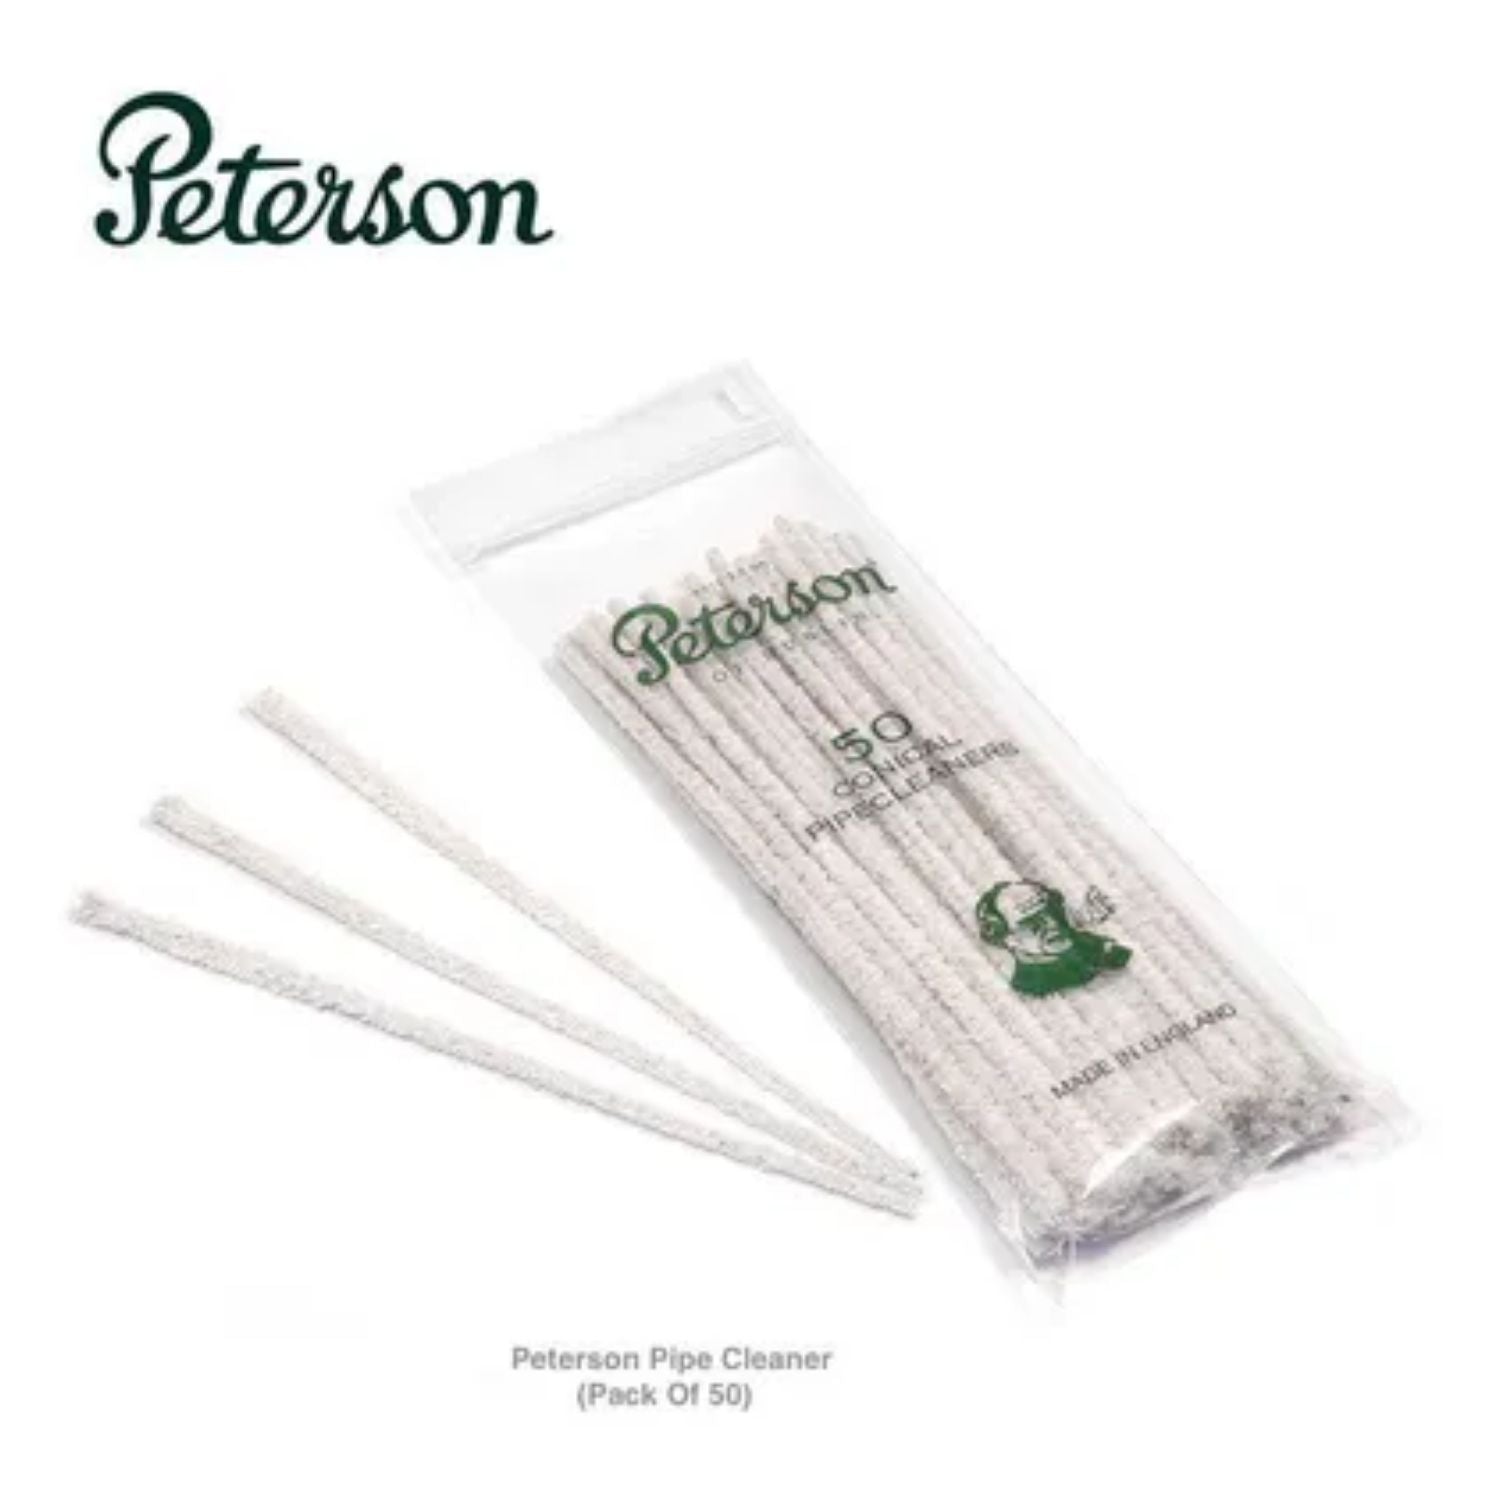 Peterson Tapered Pipe Cleaners